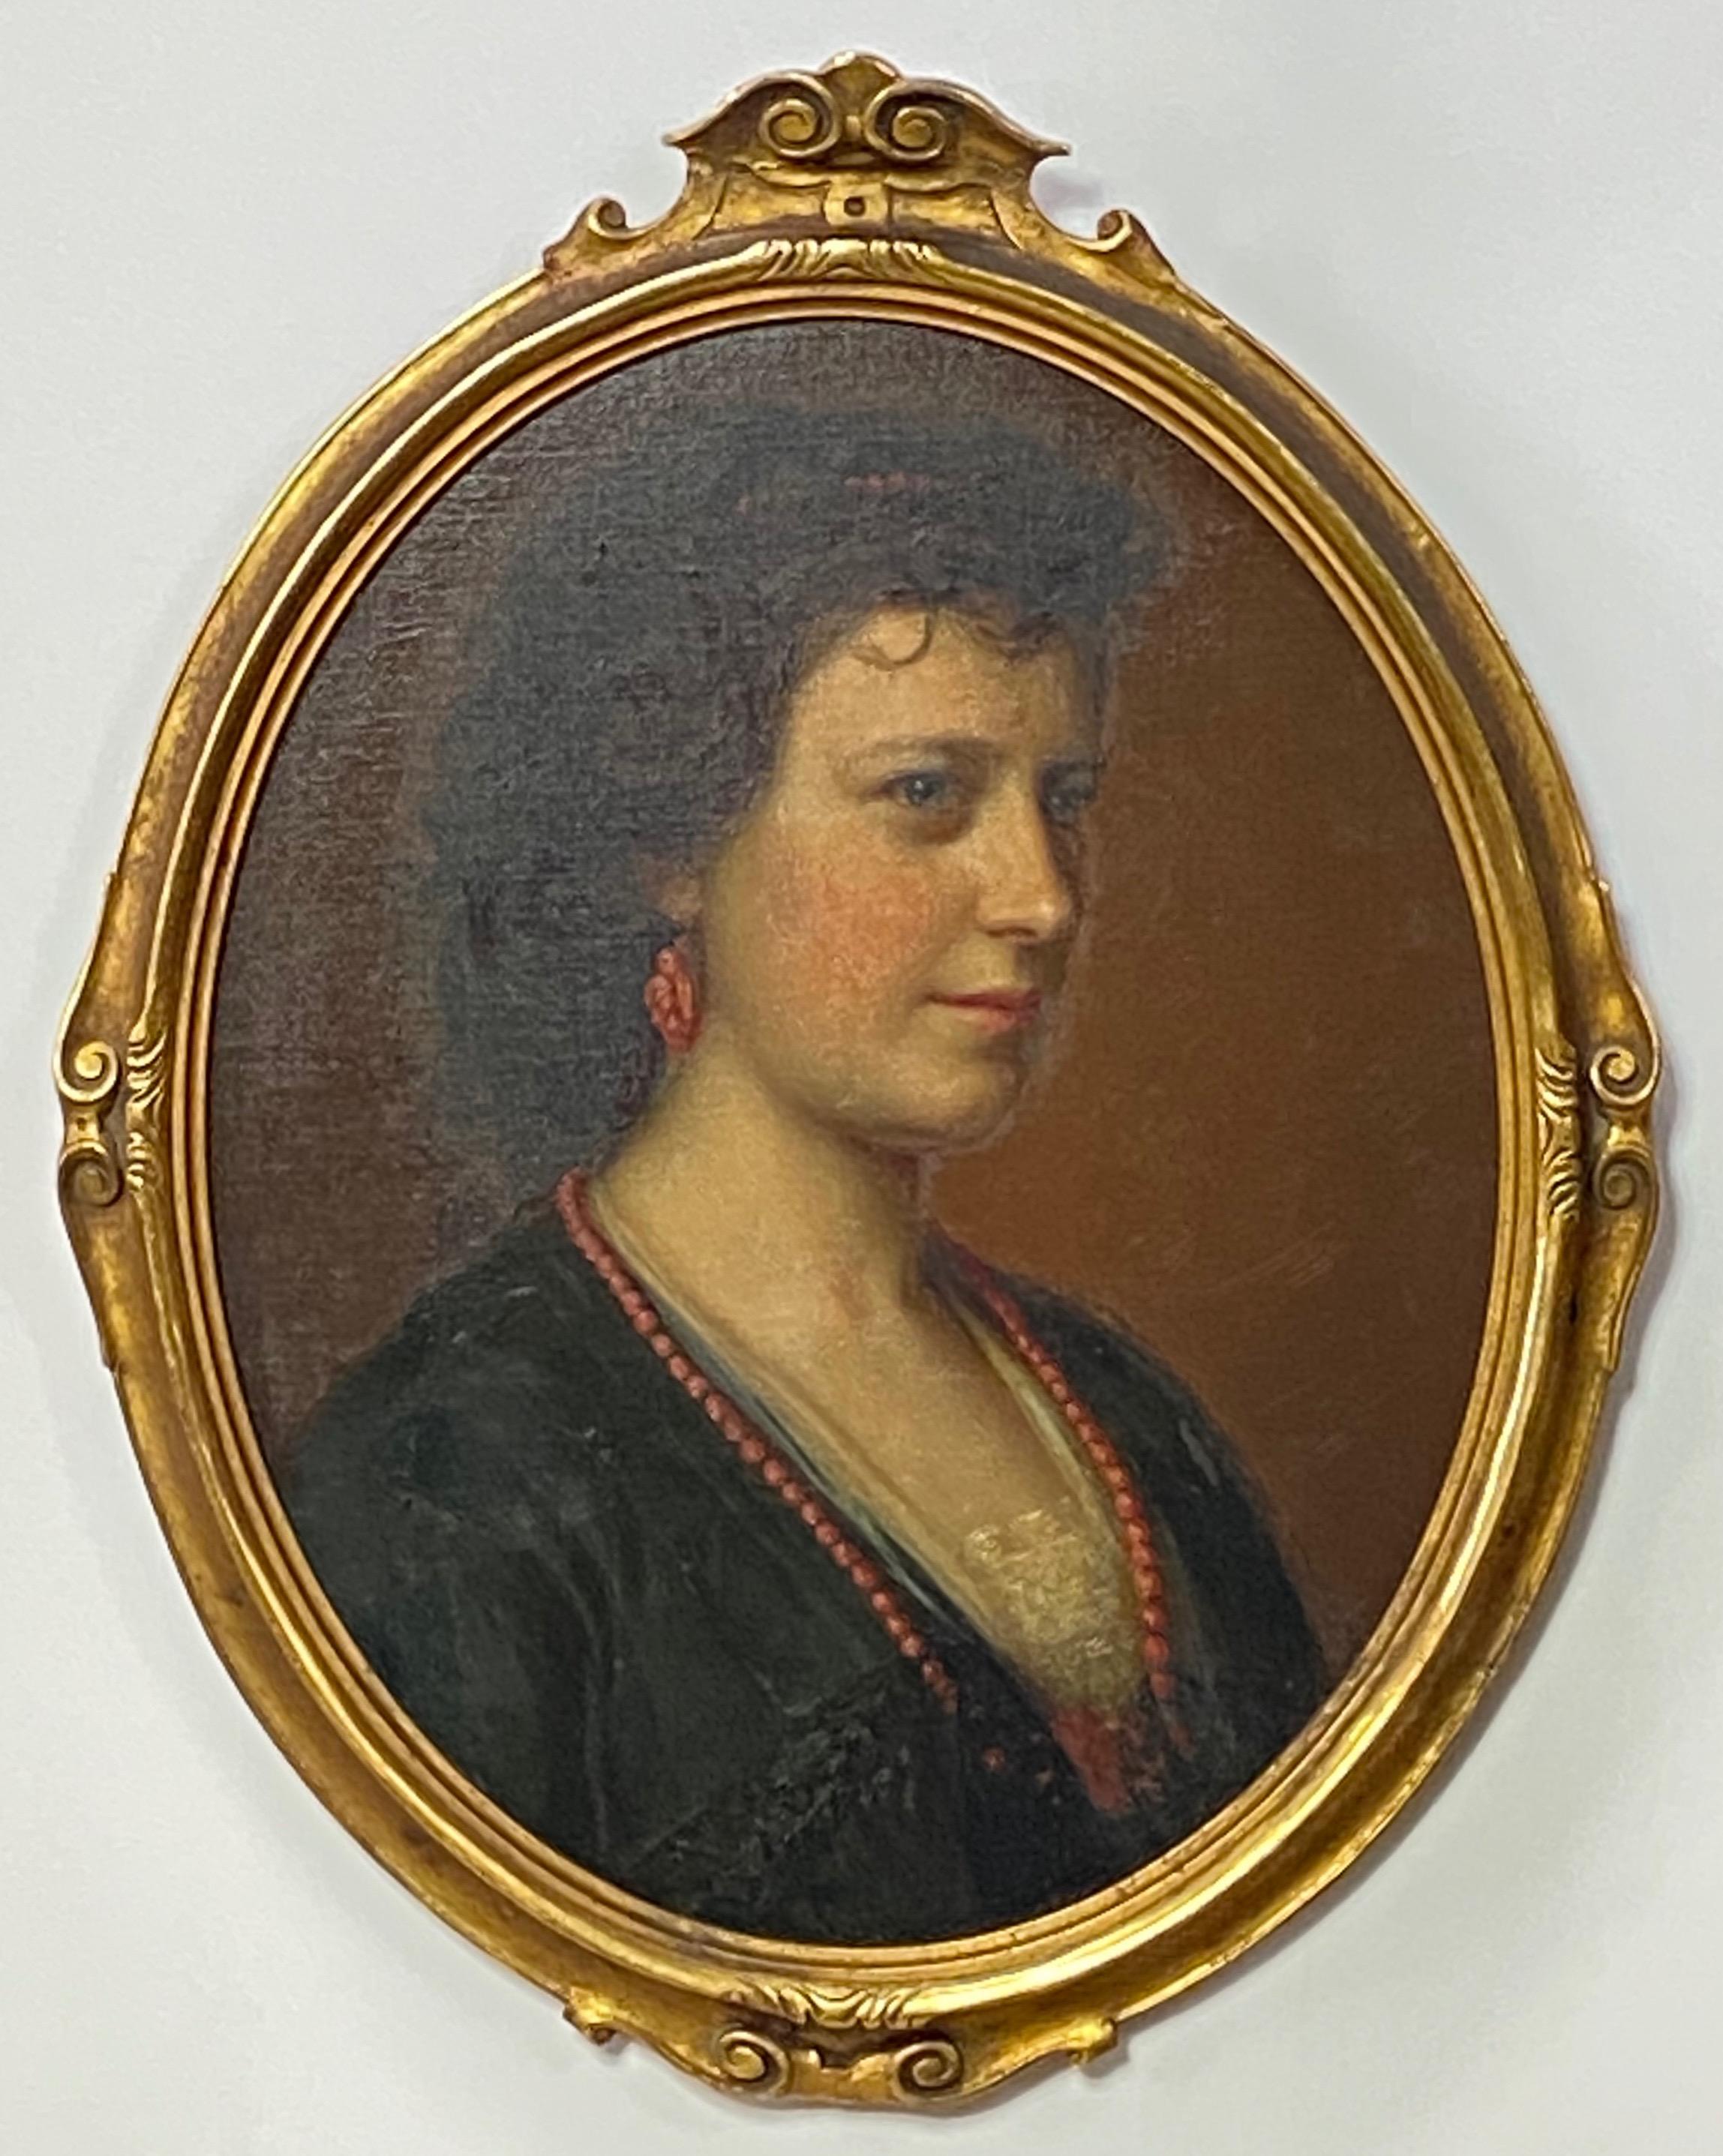 Beautifully painted portrait of an attractive young woman in gilt oval frame.
Oil on canvas applied down on artist board. Unsigned.
English or American
Possibly this was originally a square painting cut down to fit in this frame.